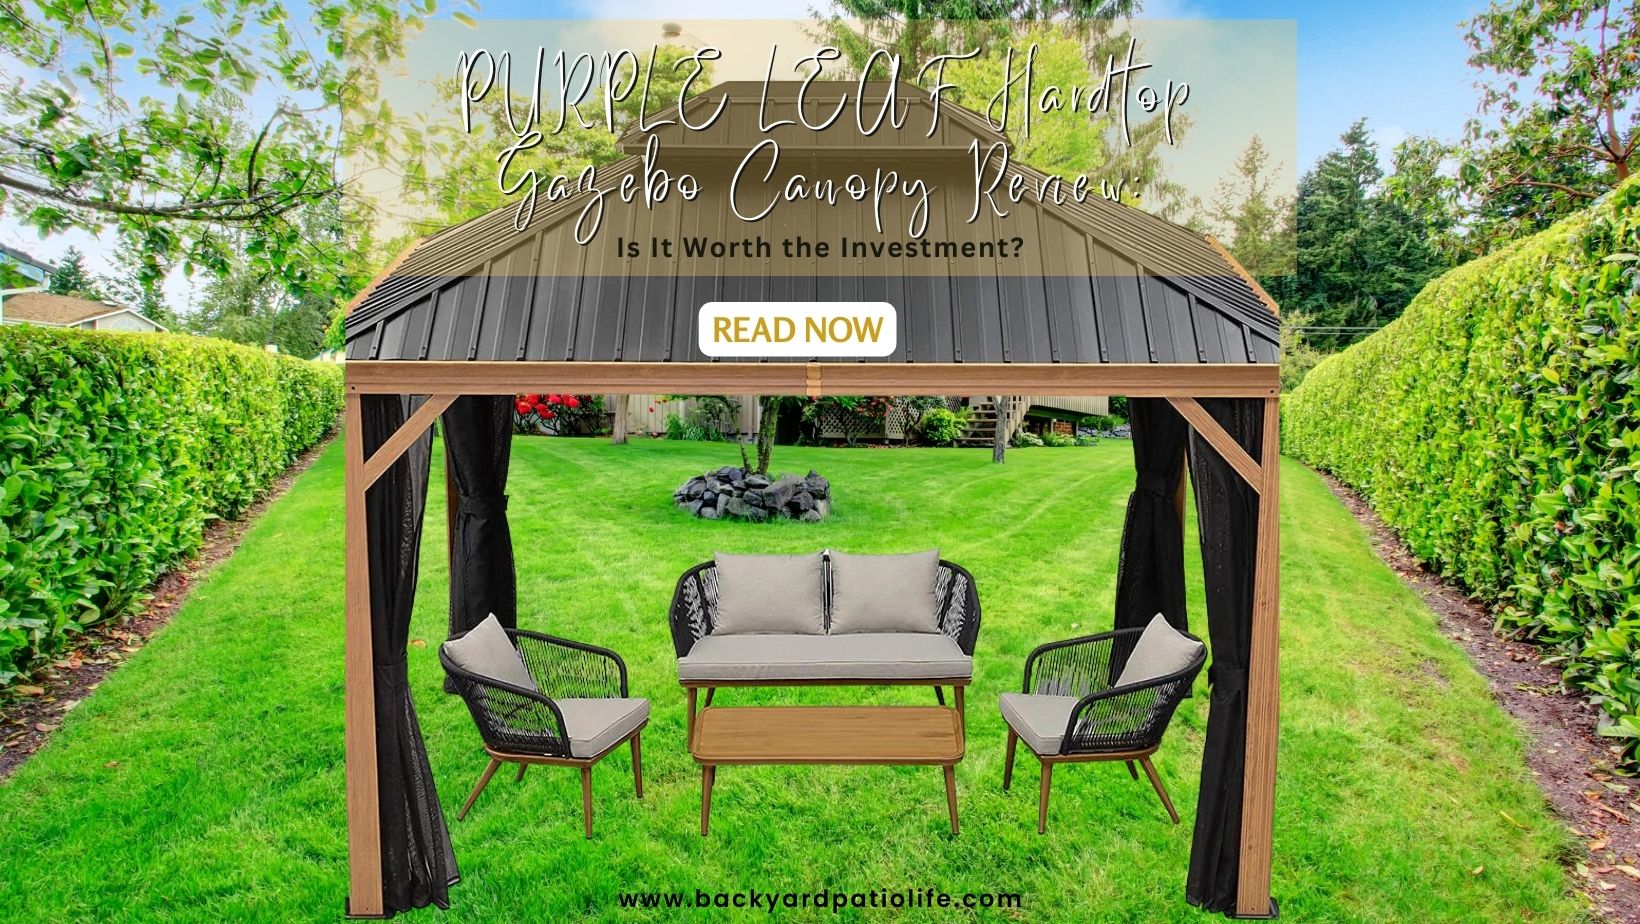 Title-PURPLE LEAF Hardtop Gazebo Canopy Review Is It Worth the Investment